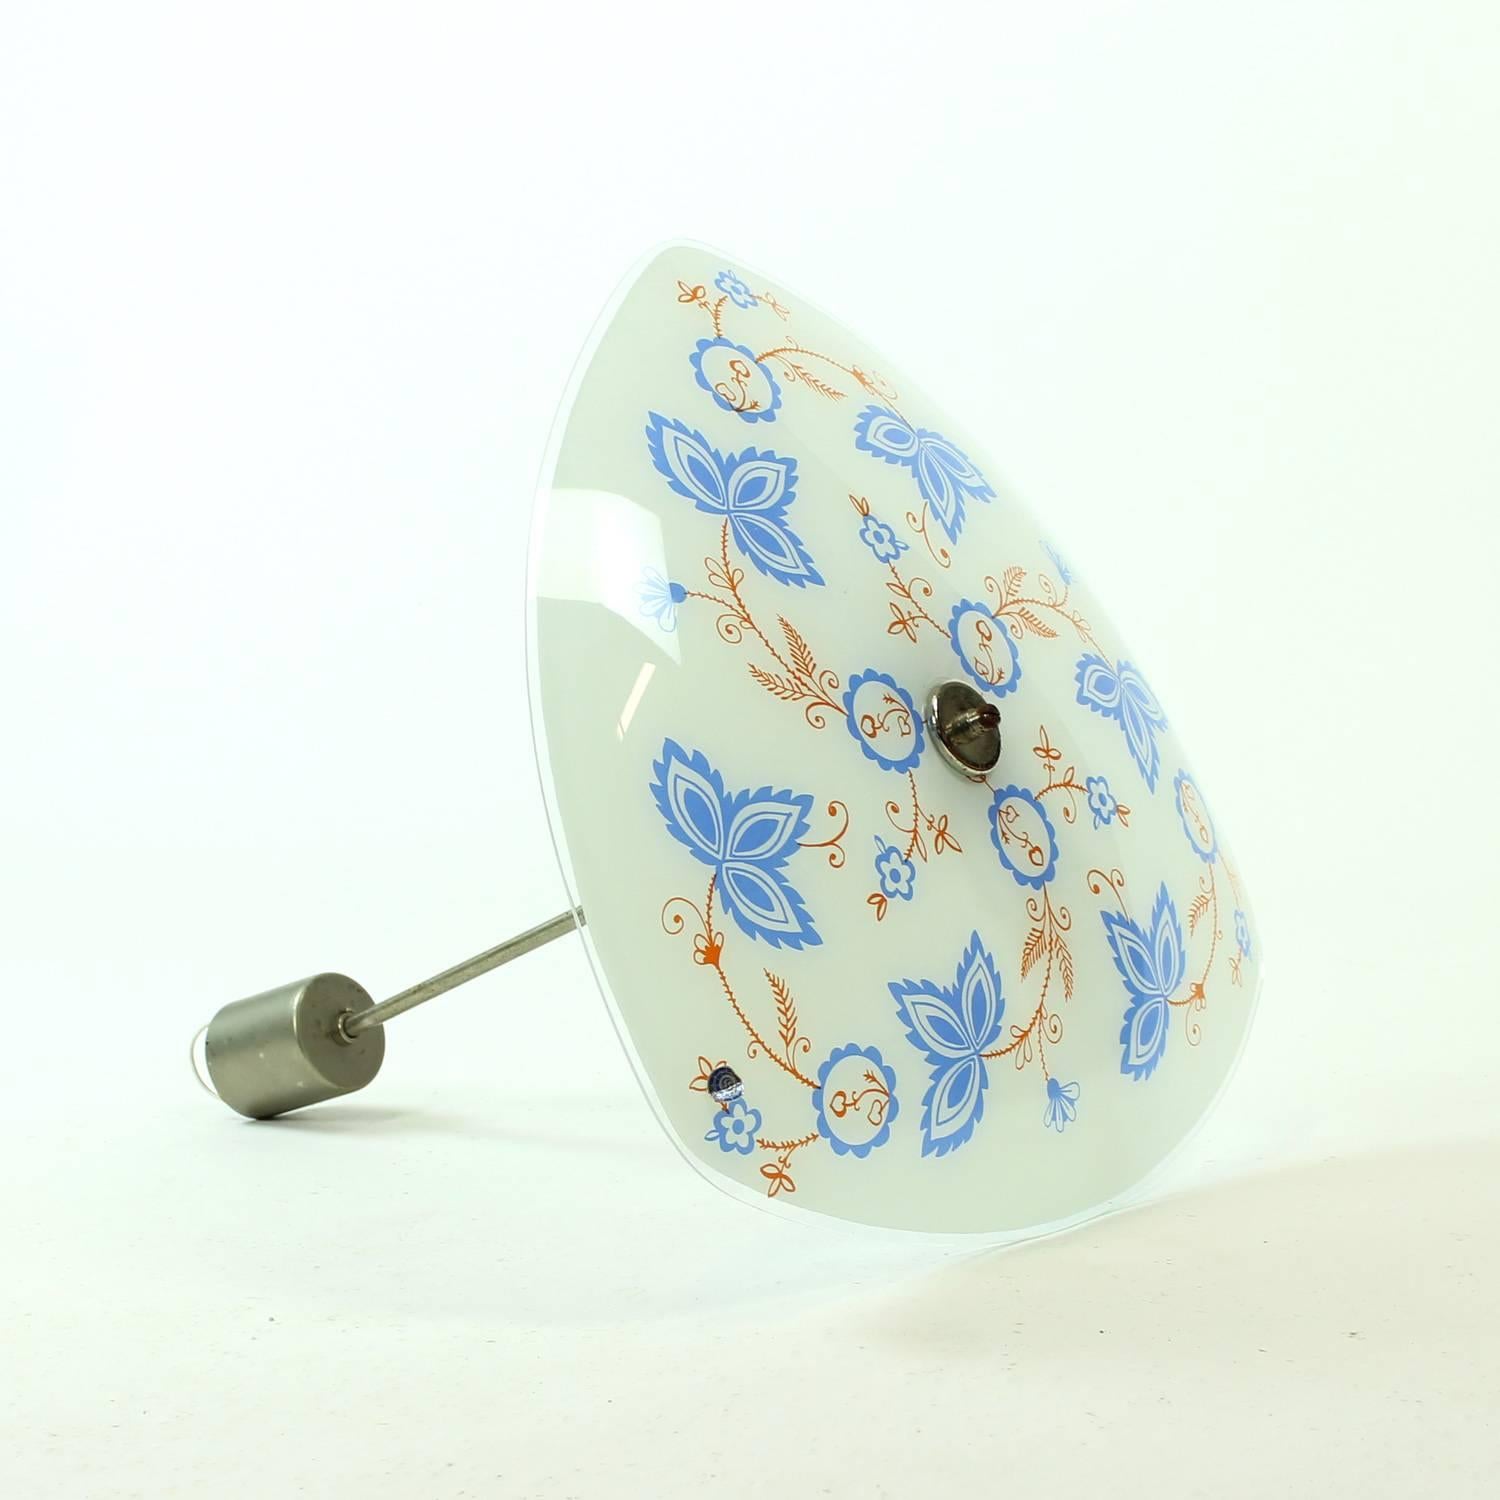 Elegant and beautiful ceiling light, so very typical for the midcentury design period. Created by Napako company in 1960s. The glass plate is decorated with folk pattern. The construction is aluminum. Very good condition with minimal wear visible